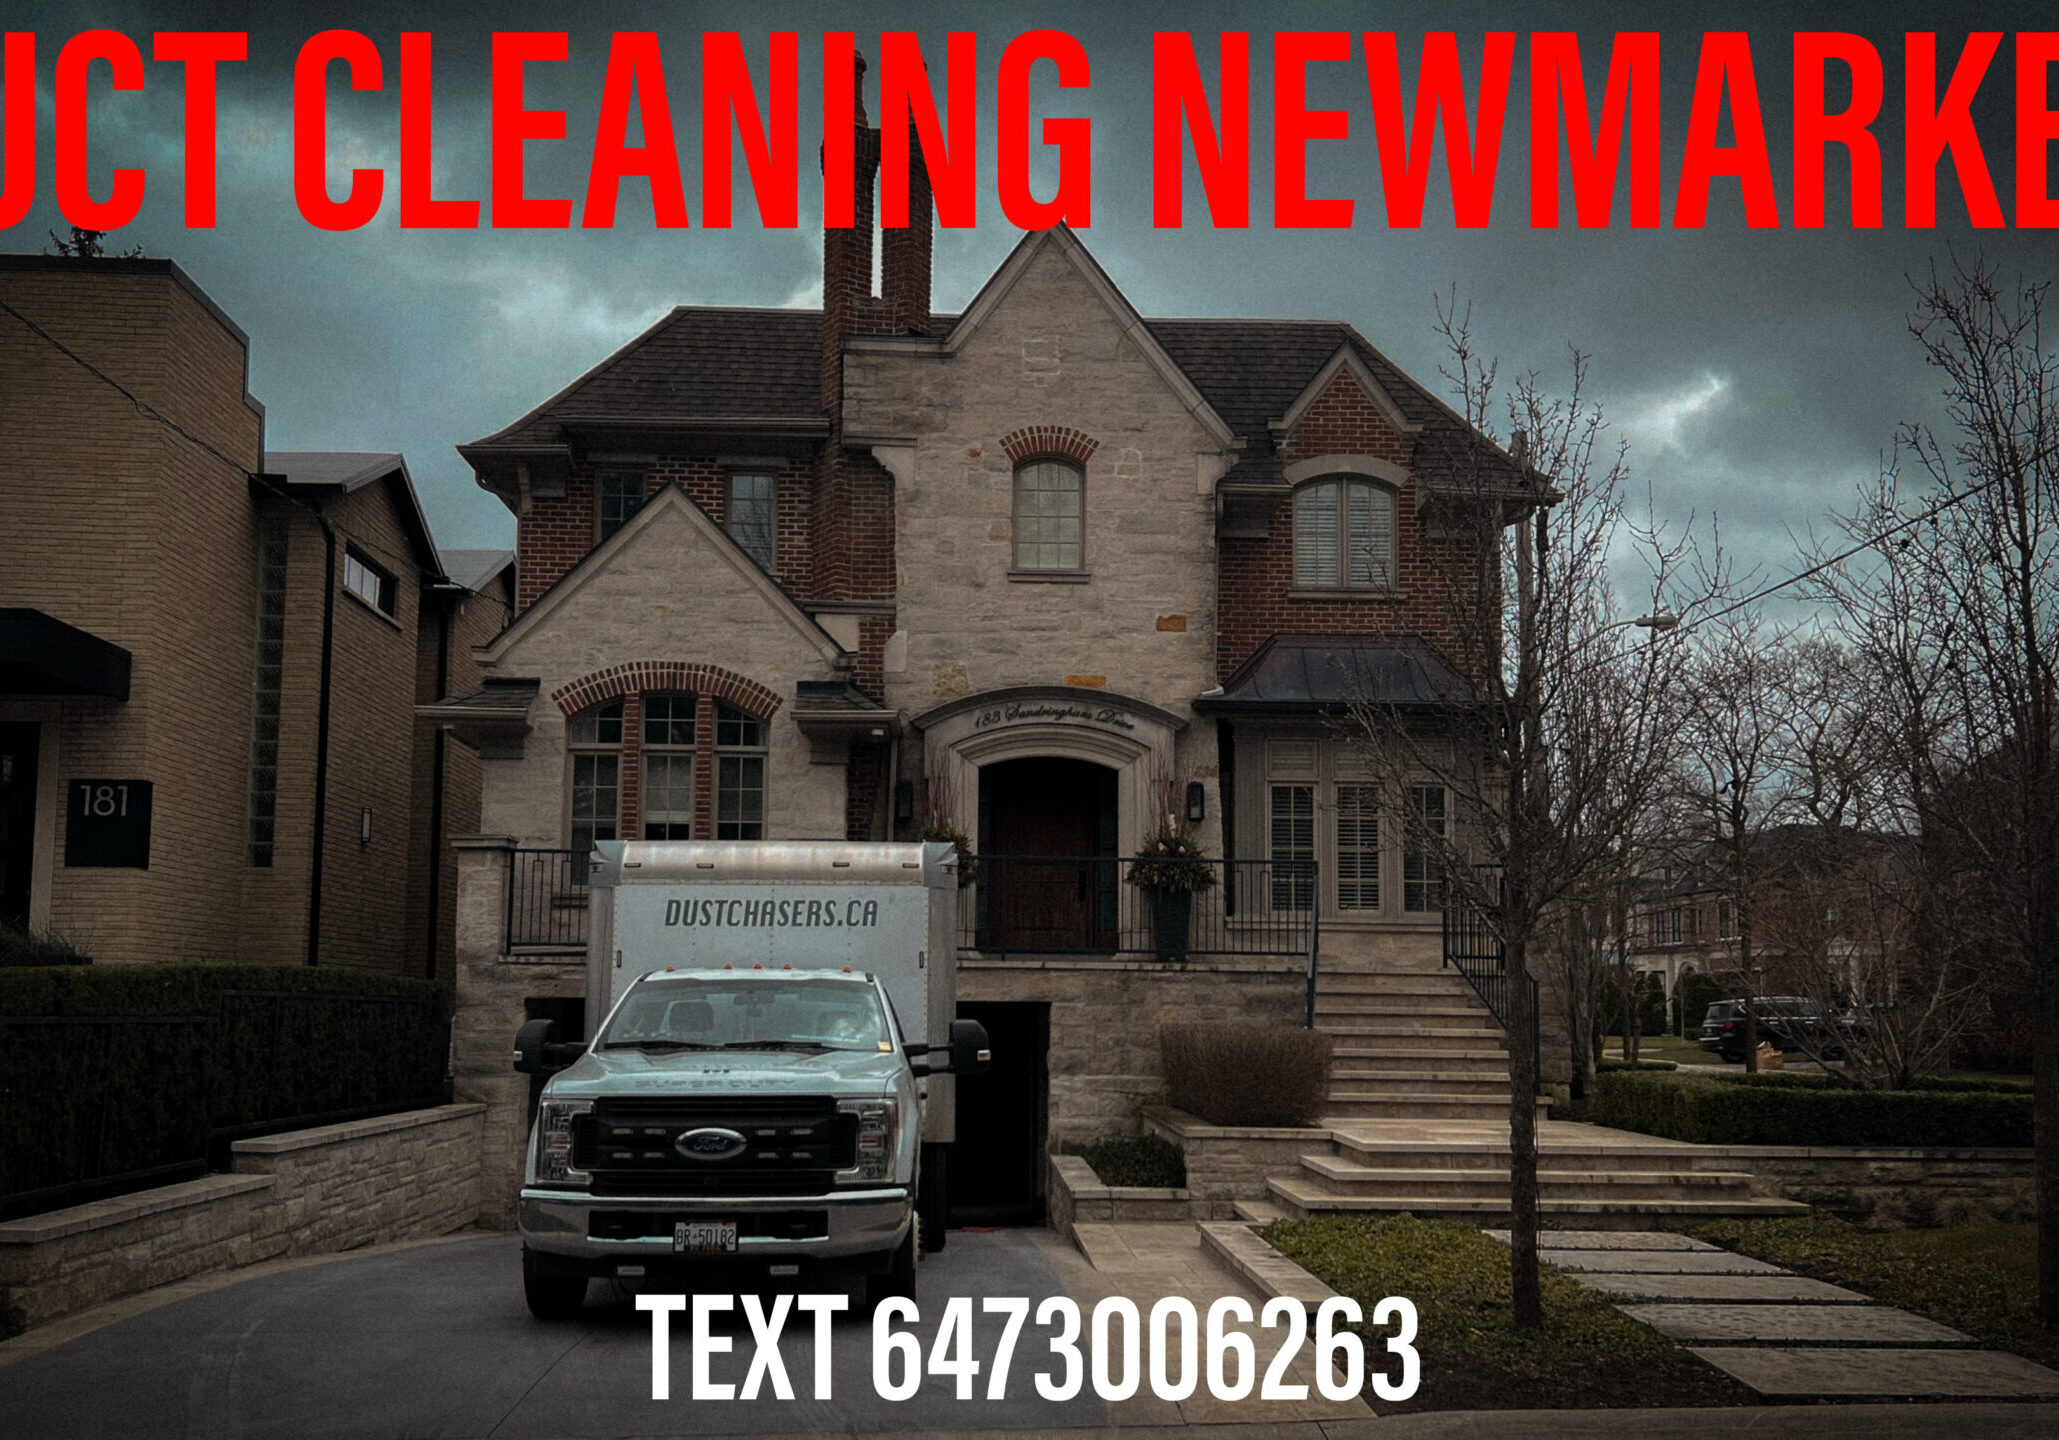 Duct-Cleaning-Newmarket